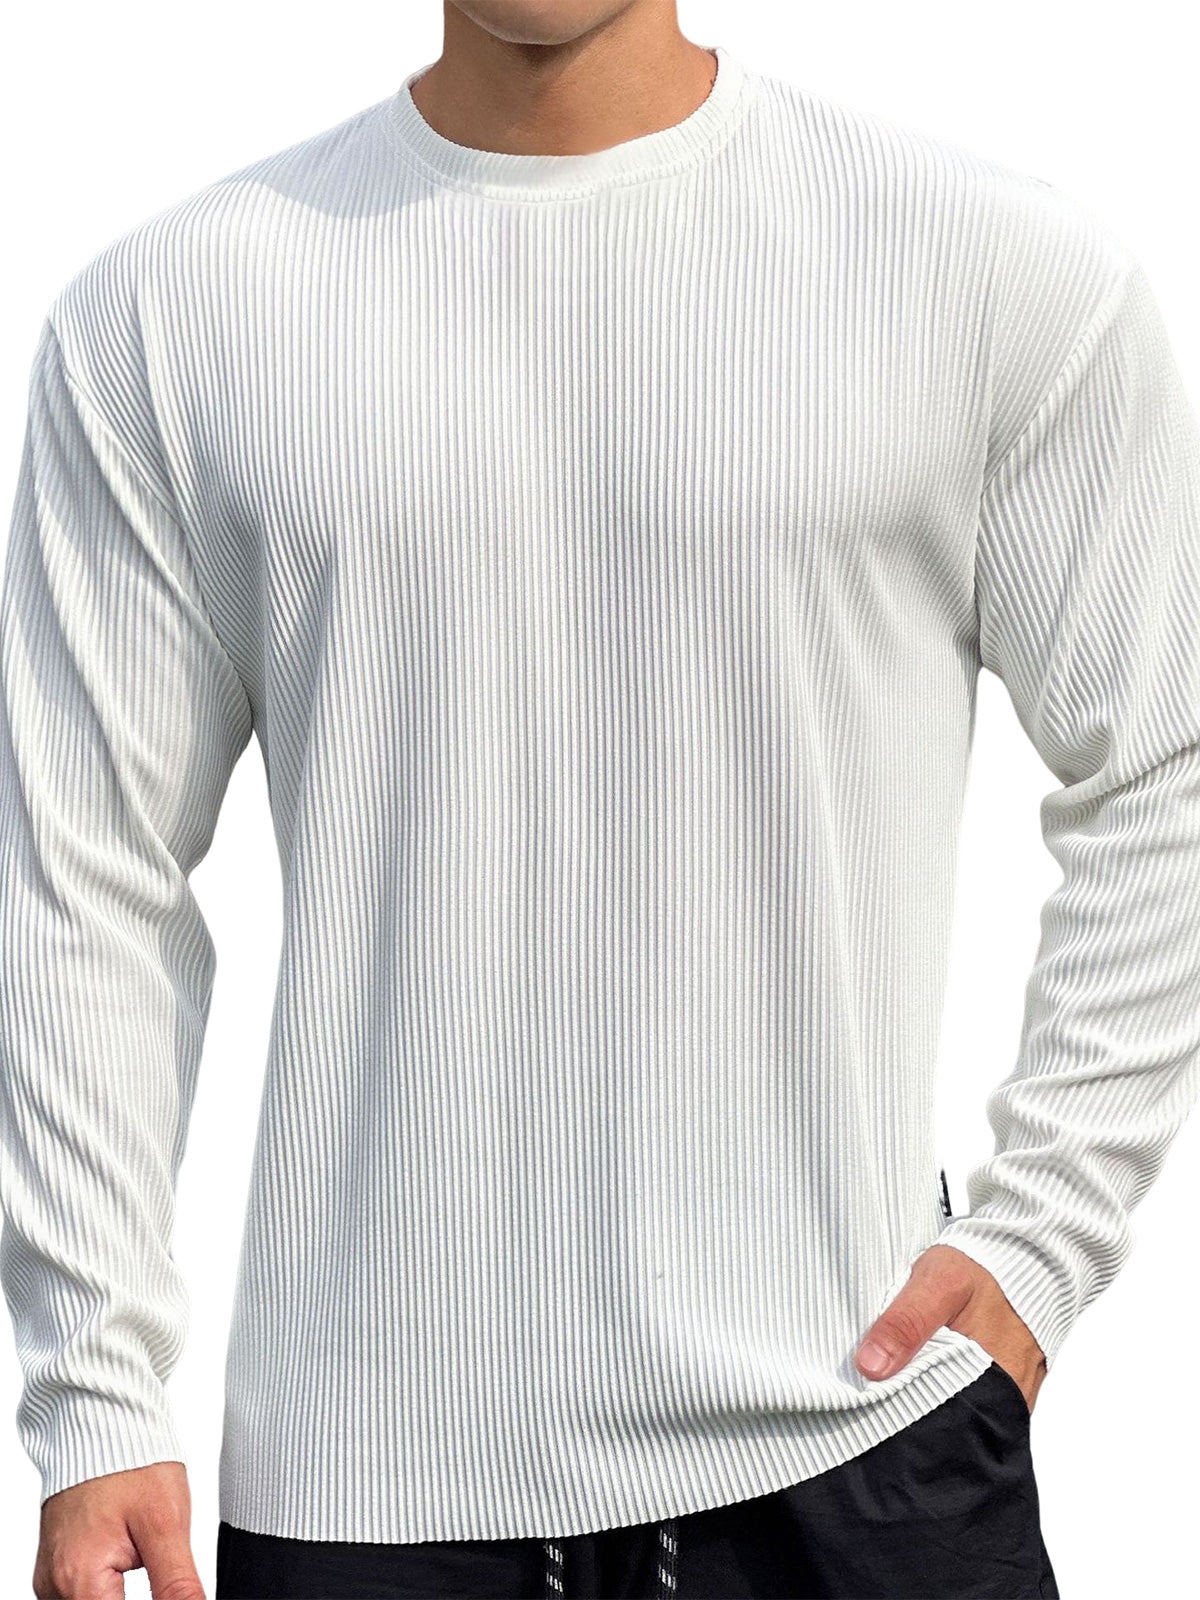 Men's Casual Round Neck Striped Loose Large Size T-Shirt